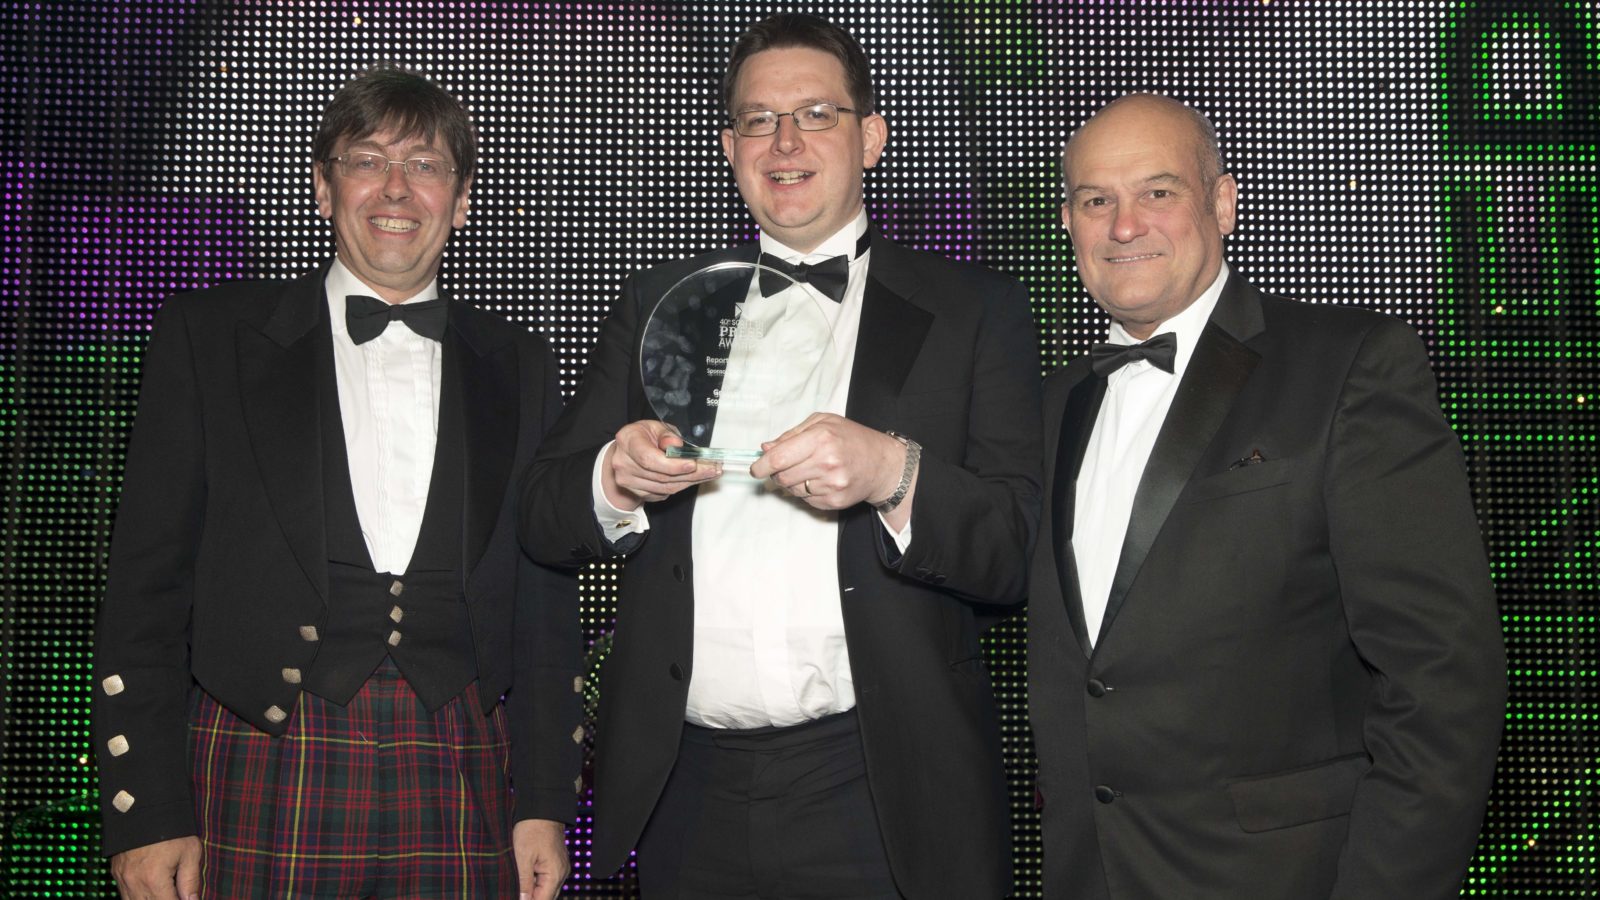 Reporter of the Year
Sponsored by Openreach - @WeAreOpenreach
Winner
Graham Grant, Scottish Daily Mail